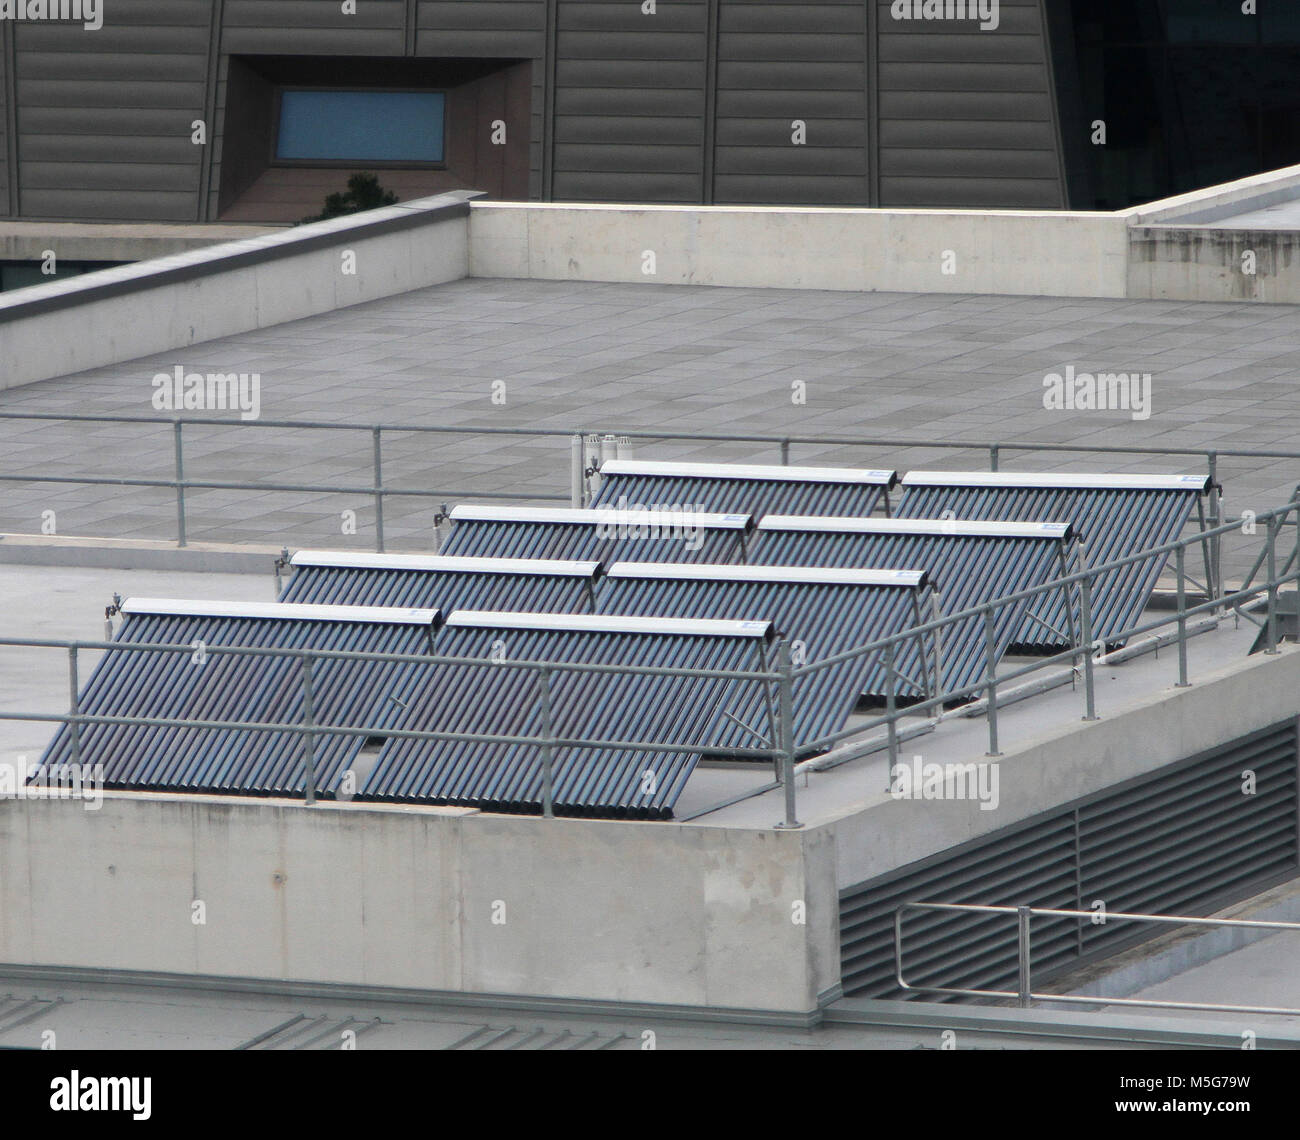 Evacuated heat pipe tubes (EHPTs) on the roof of a building, Brisbane, Australia Stock Photo